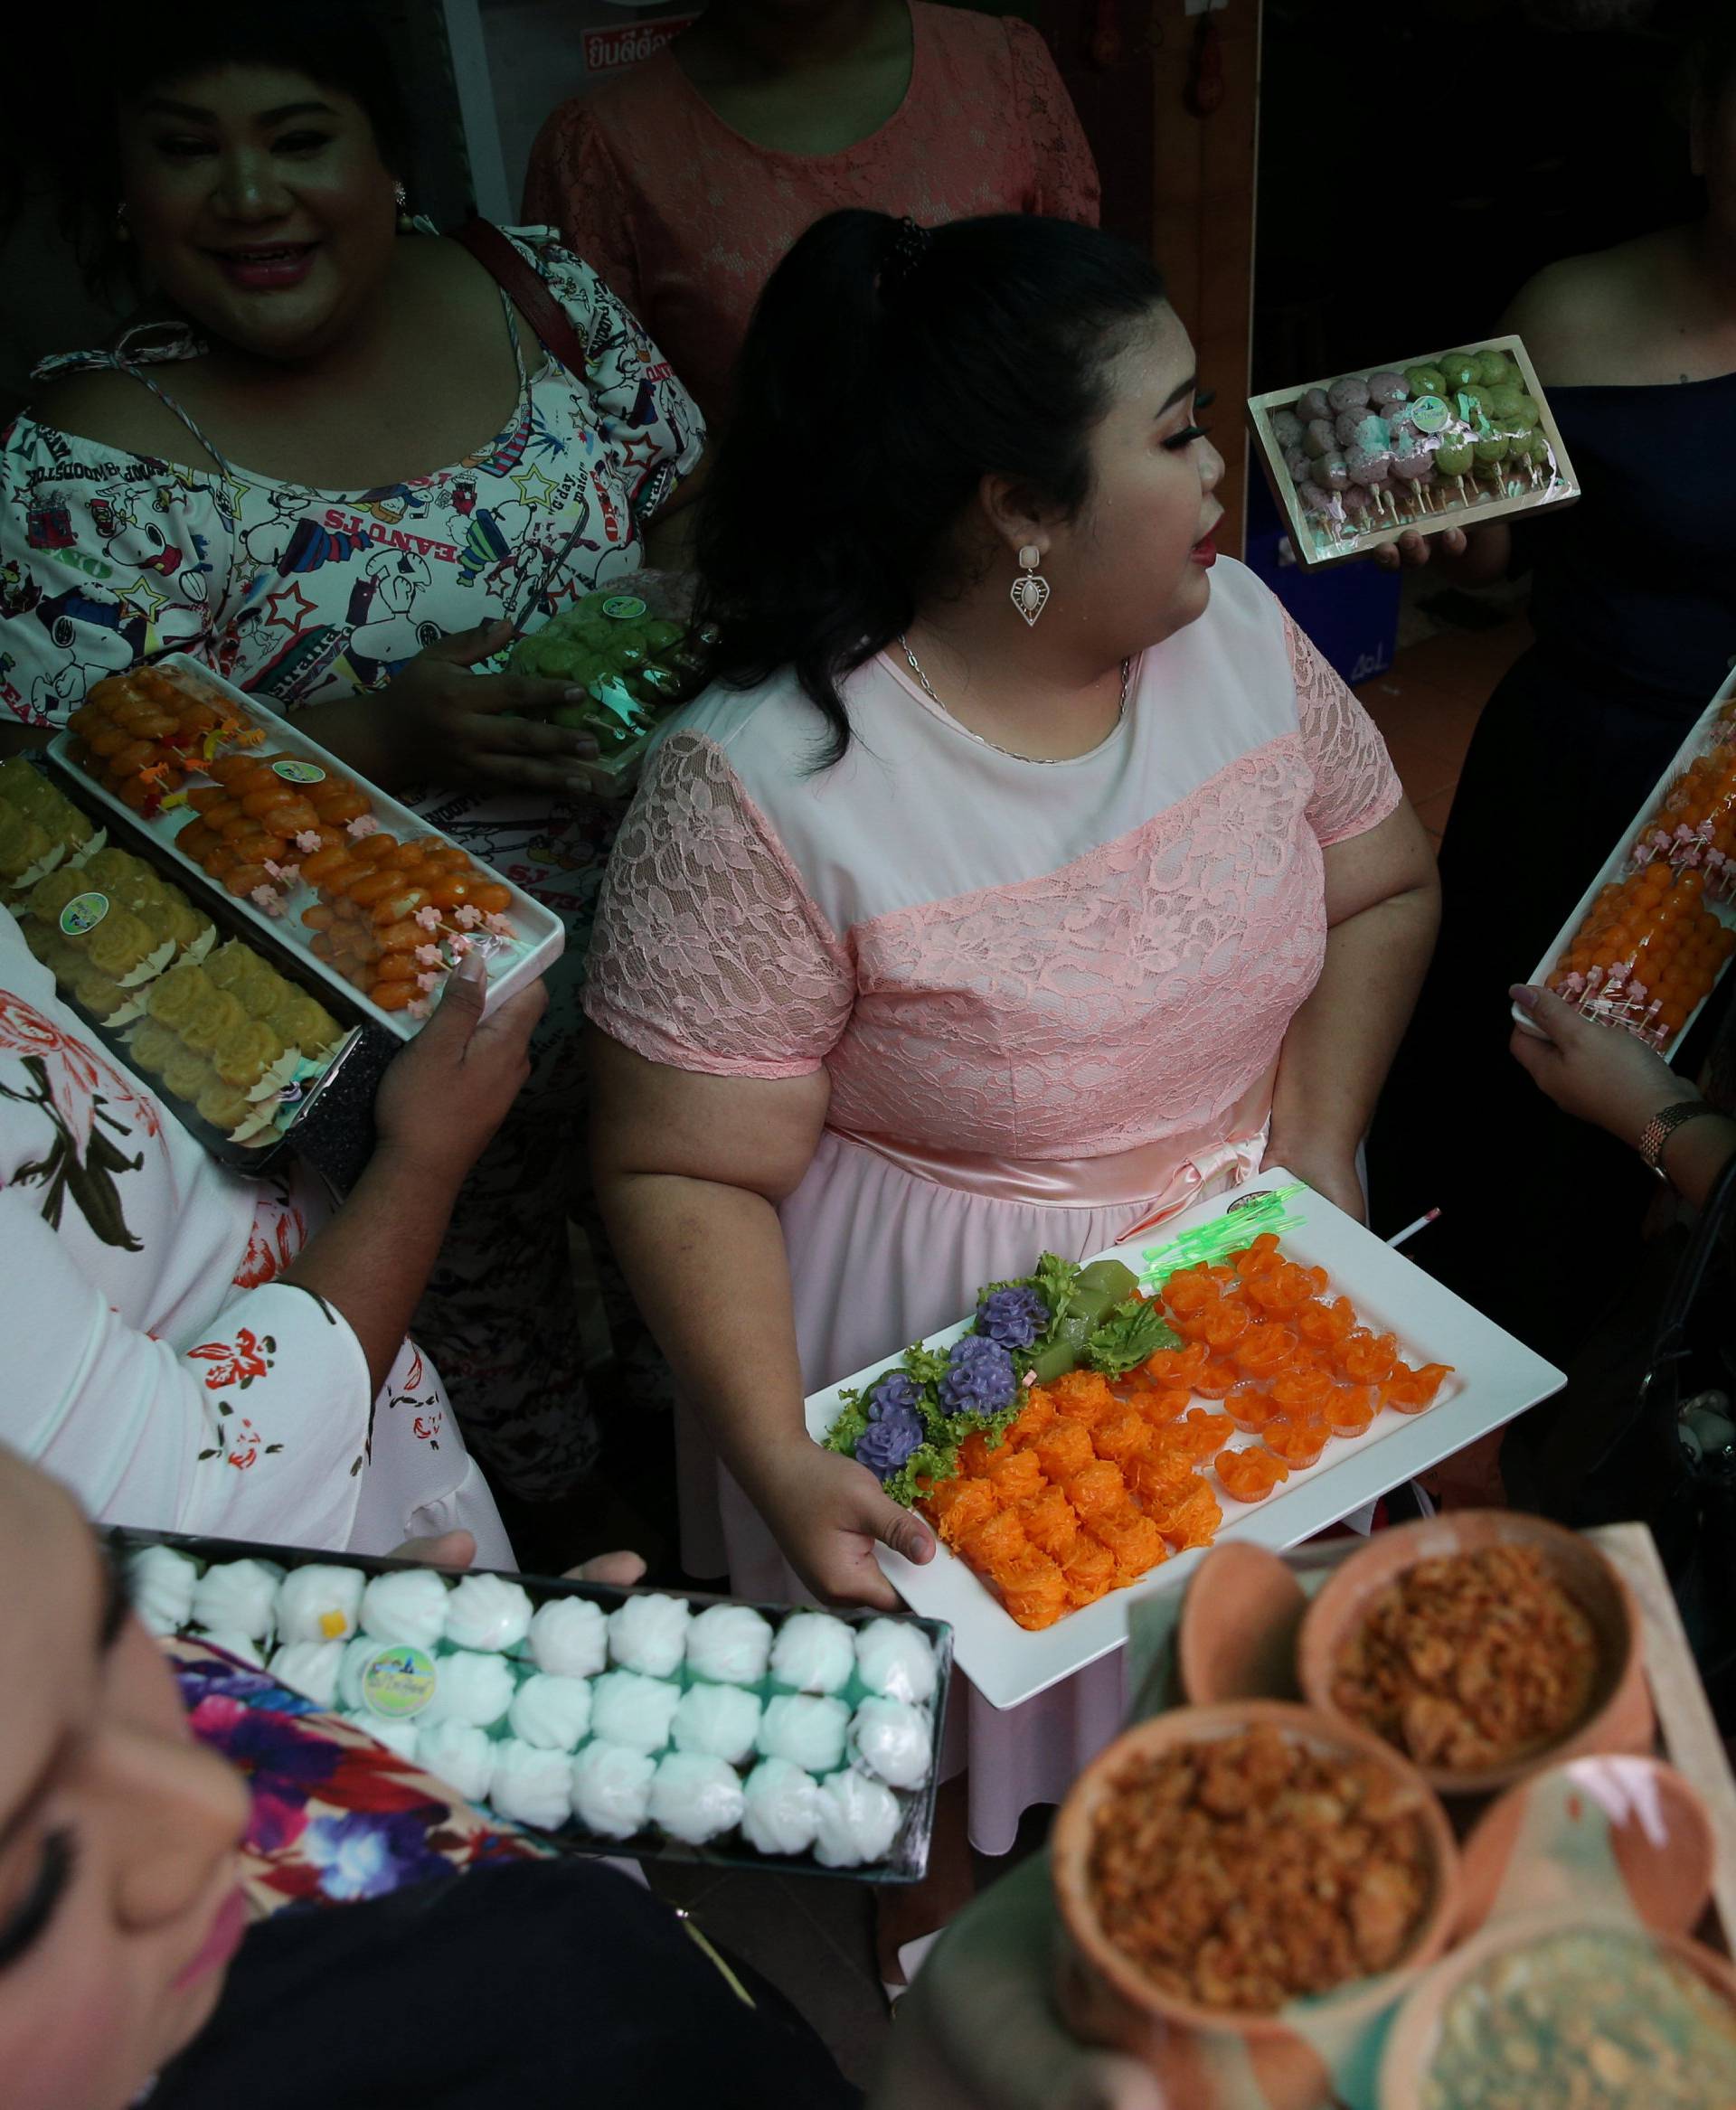 Participants in the Miss Jumbo beauty contest hold up desserts at a dessert shop in Nakhon Ratchasima